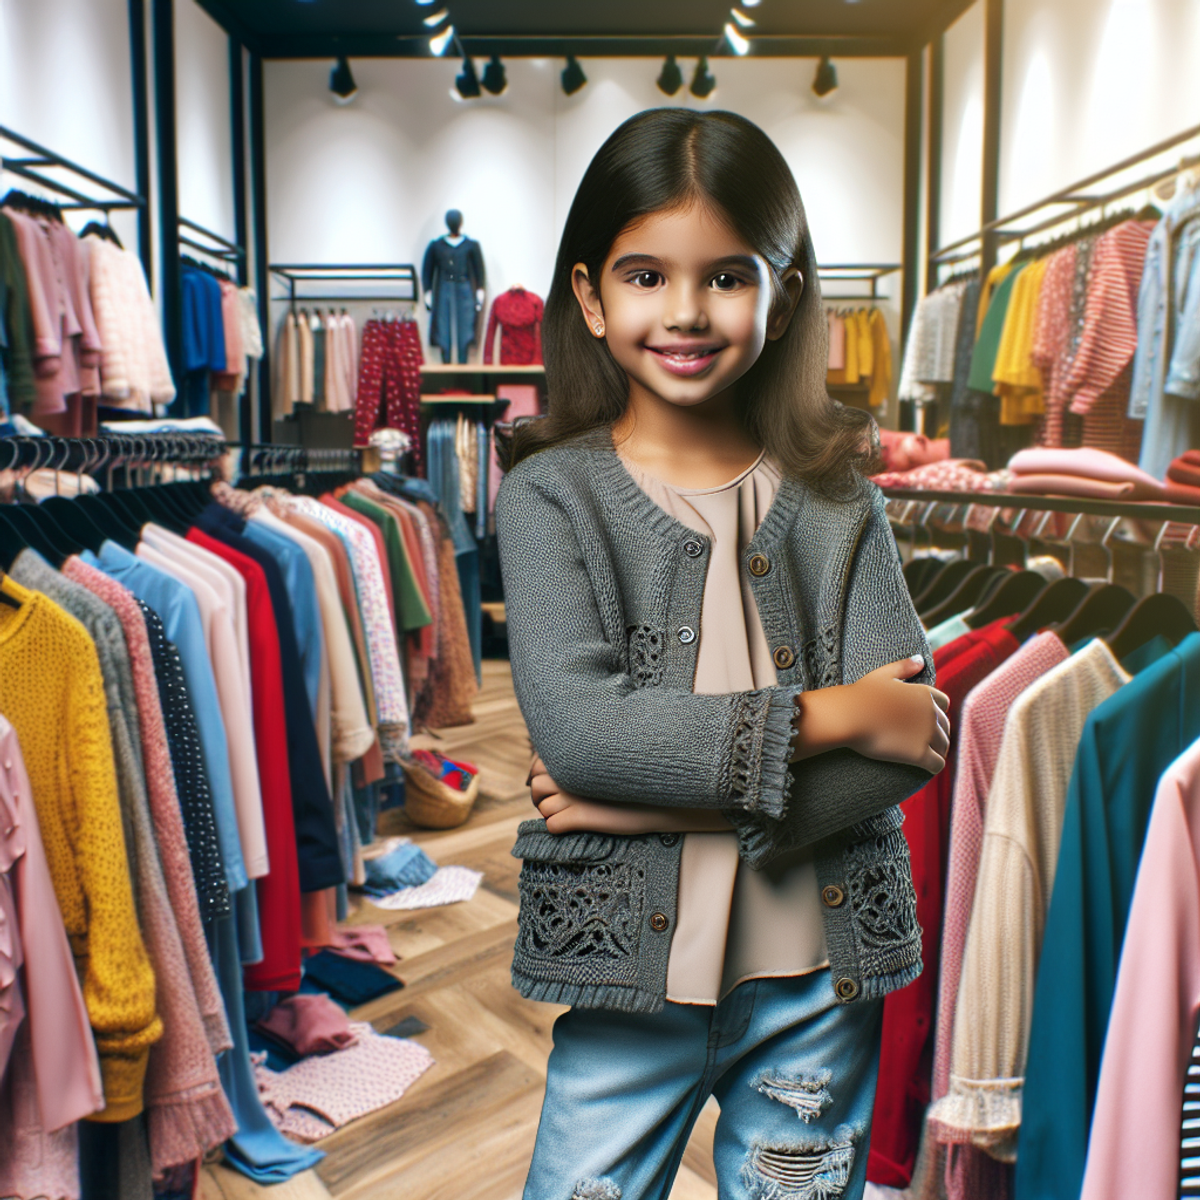 A smiling child of South Asian descent wearing fashionable clothes in a chic and trendy store filled with multicolored garments on clothing racks.